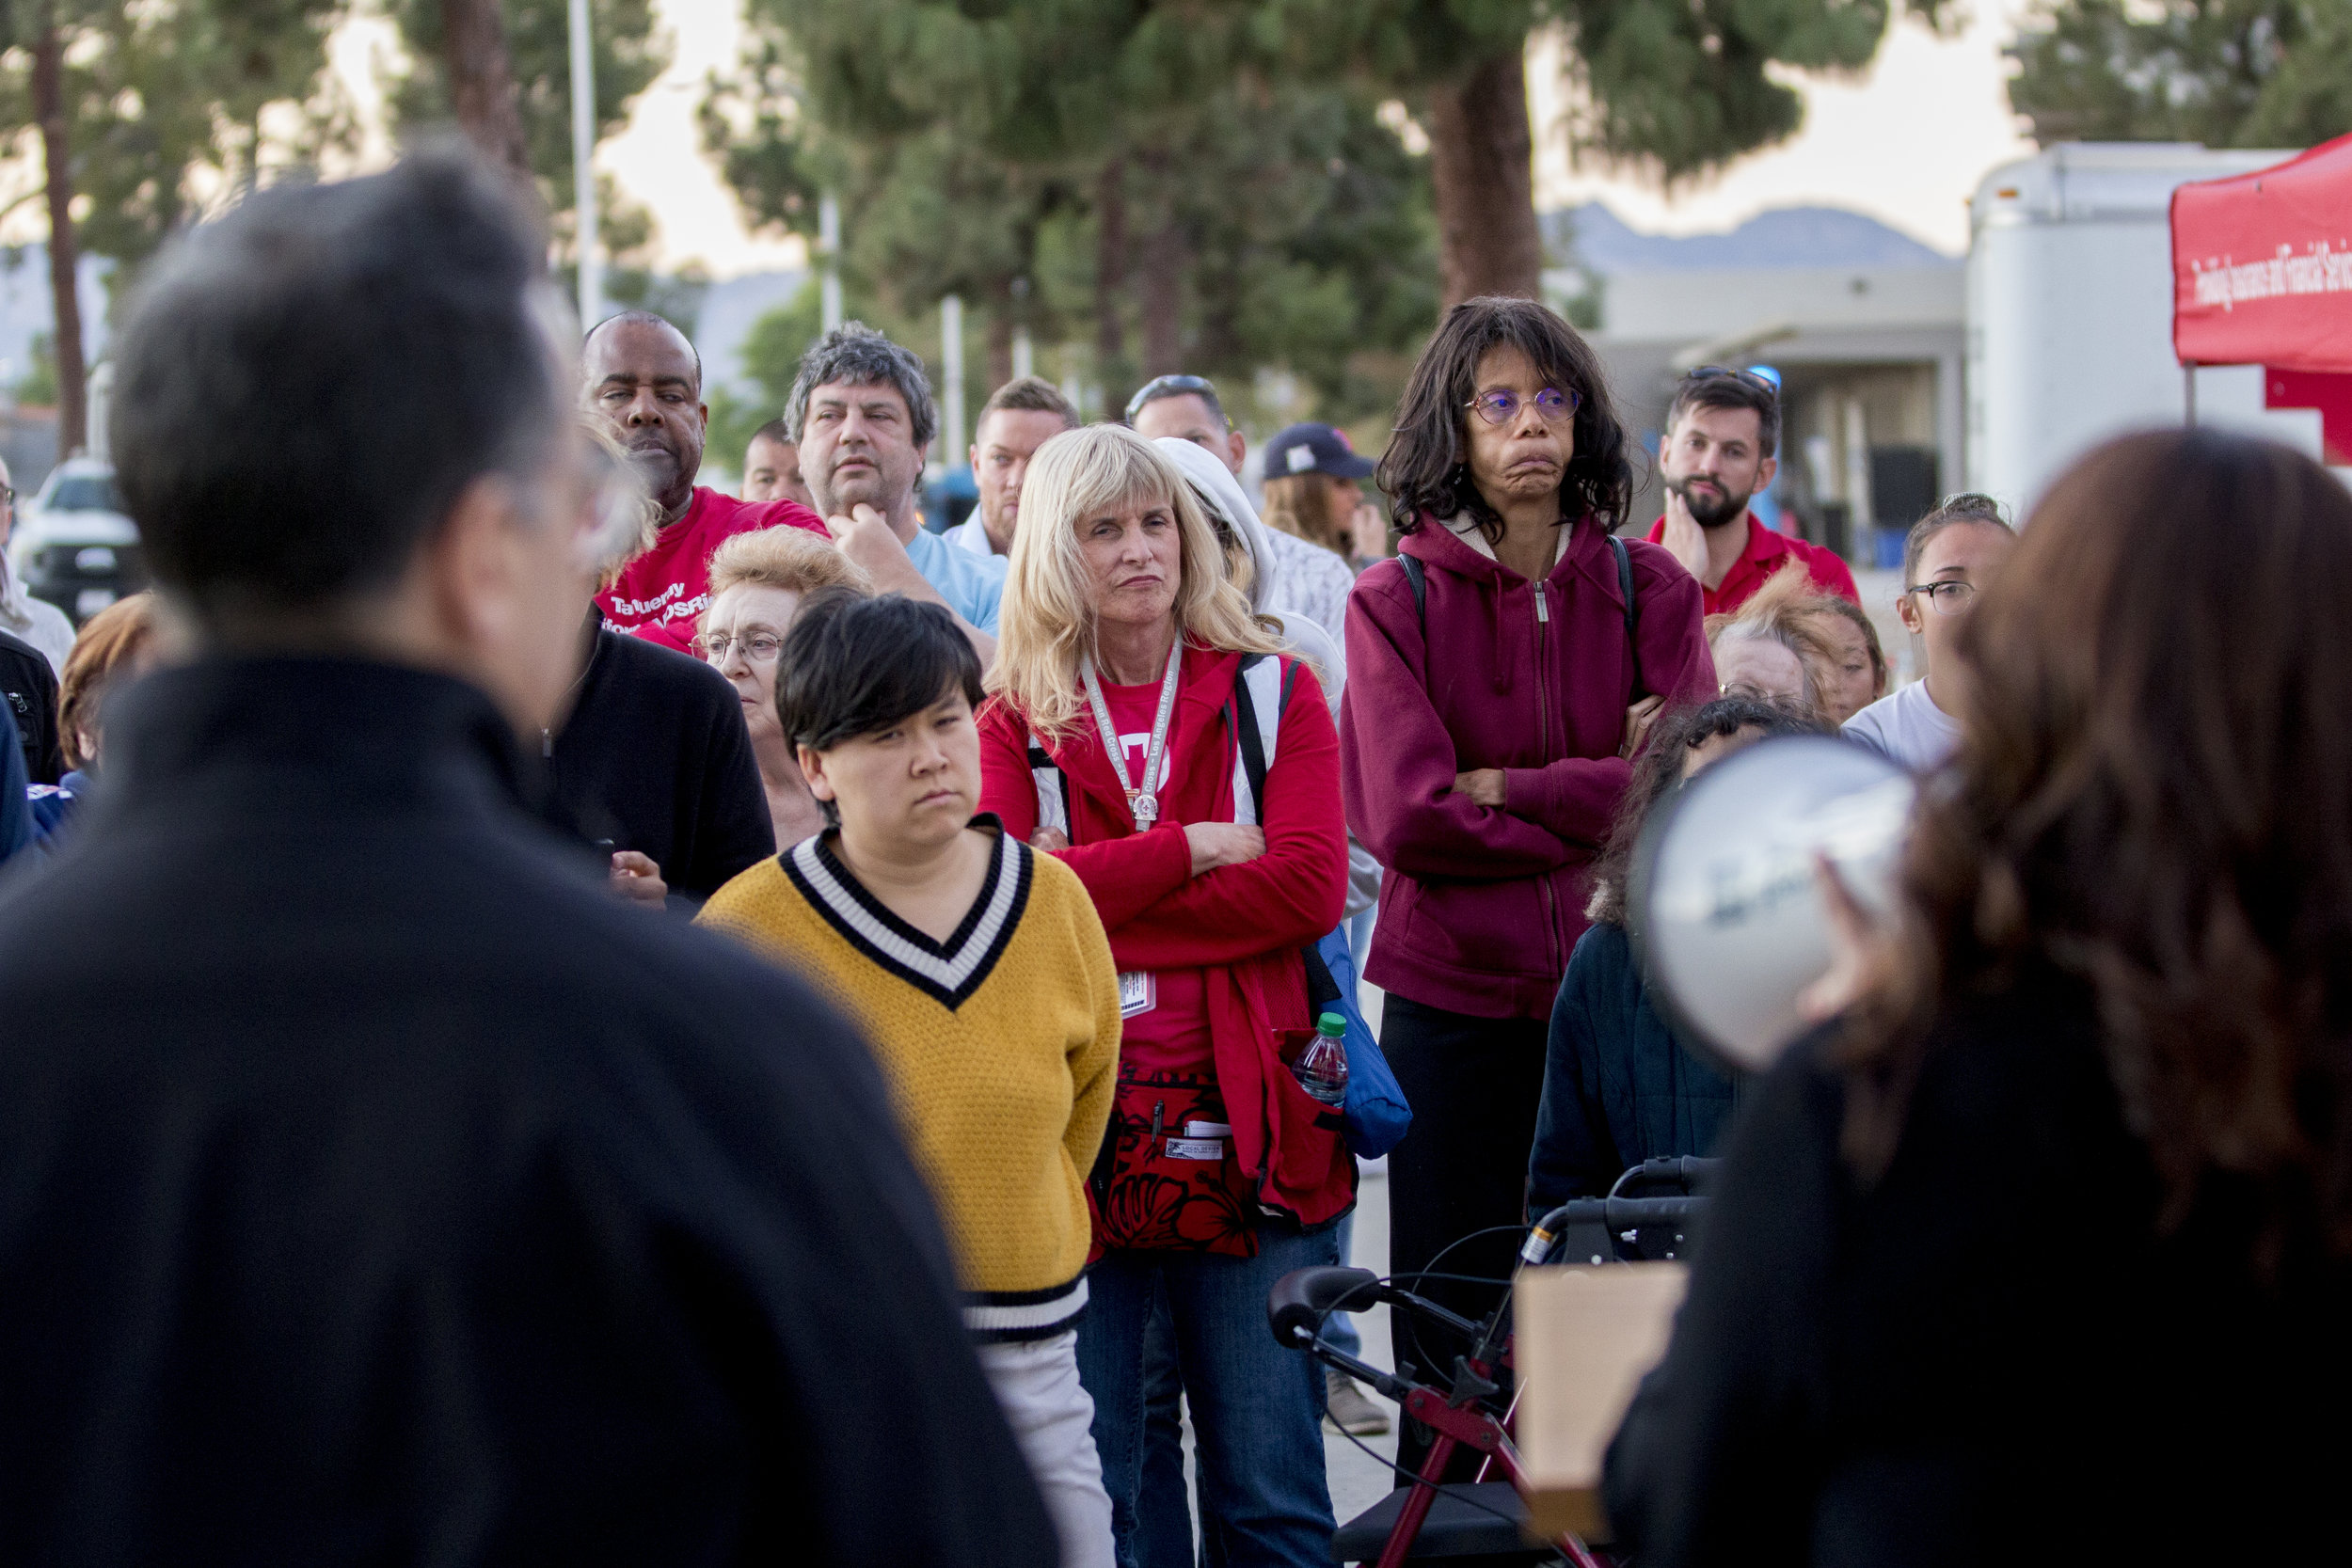  Evacuees listen as authorities share updates on the Woolsey fire in front of the evacuation center set up at Los Angeles Pierce College on November 9, 2018 in Woodland Hills, Calif. (Jose Lopez) 